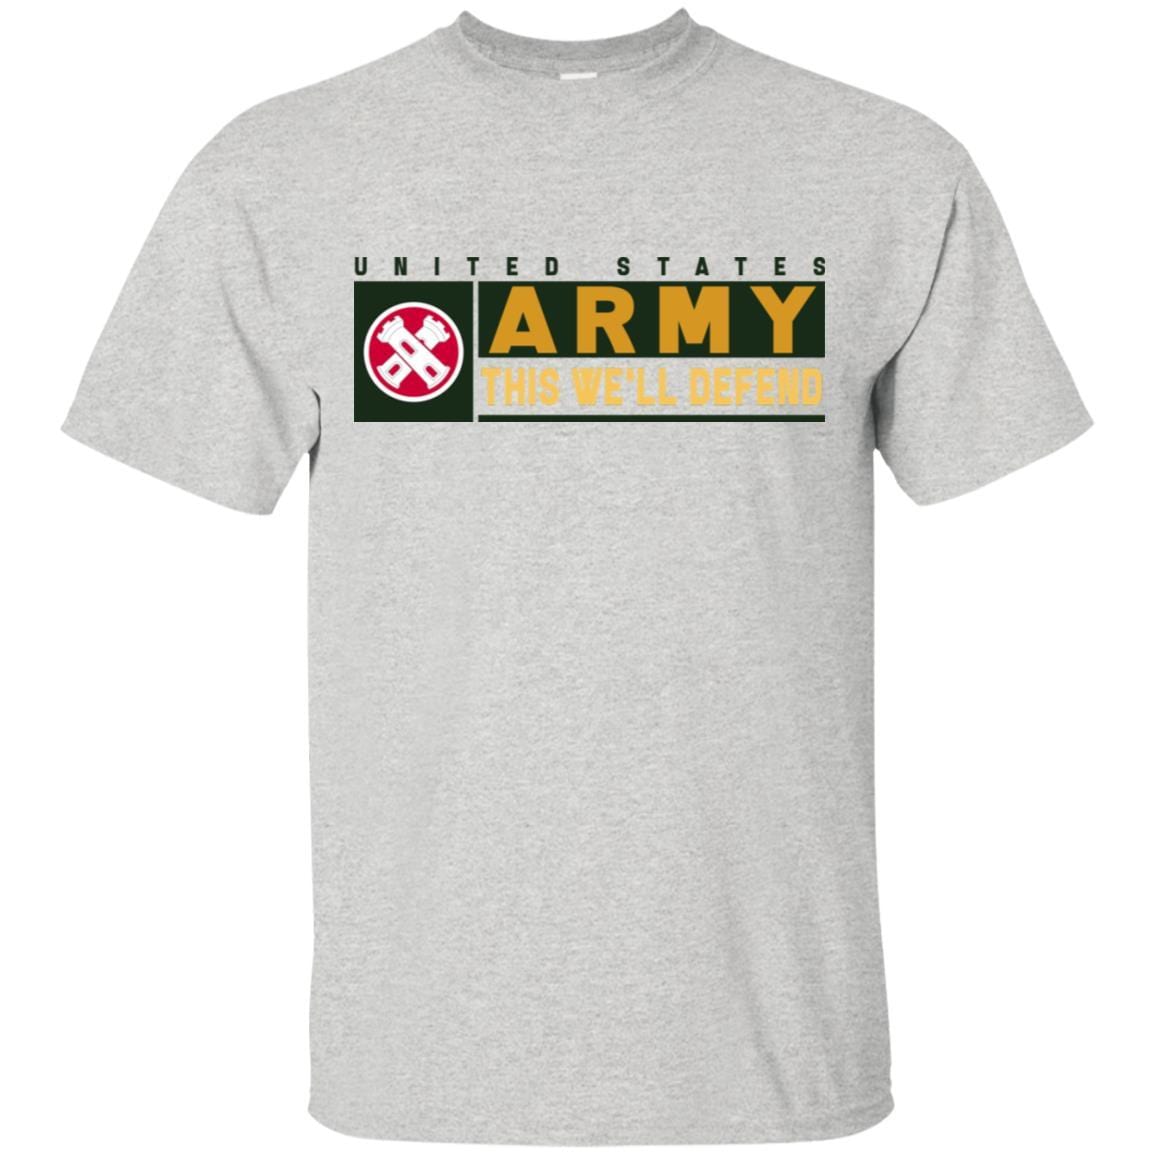 US Army 16TH ENGINEER BRIGADE- This We'll Defend T-Shirt On Front For Men-TShirt-Army-Veterans Nation